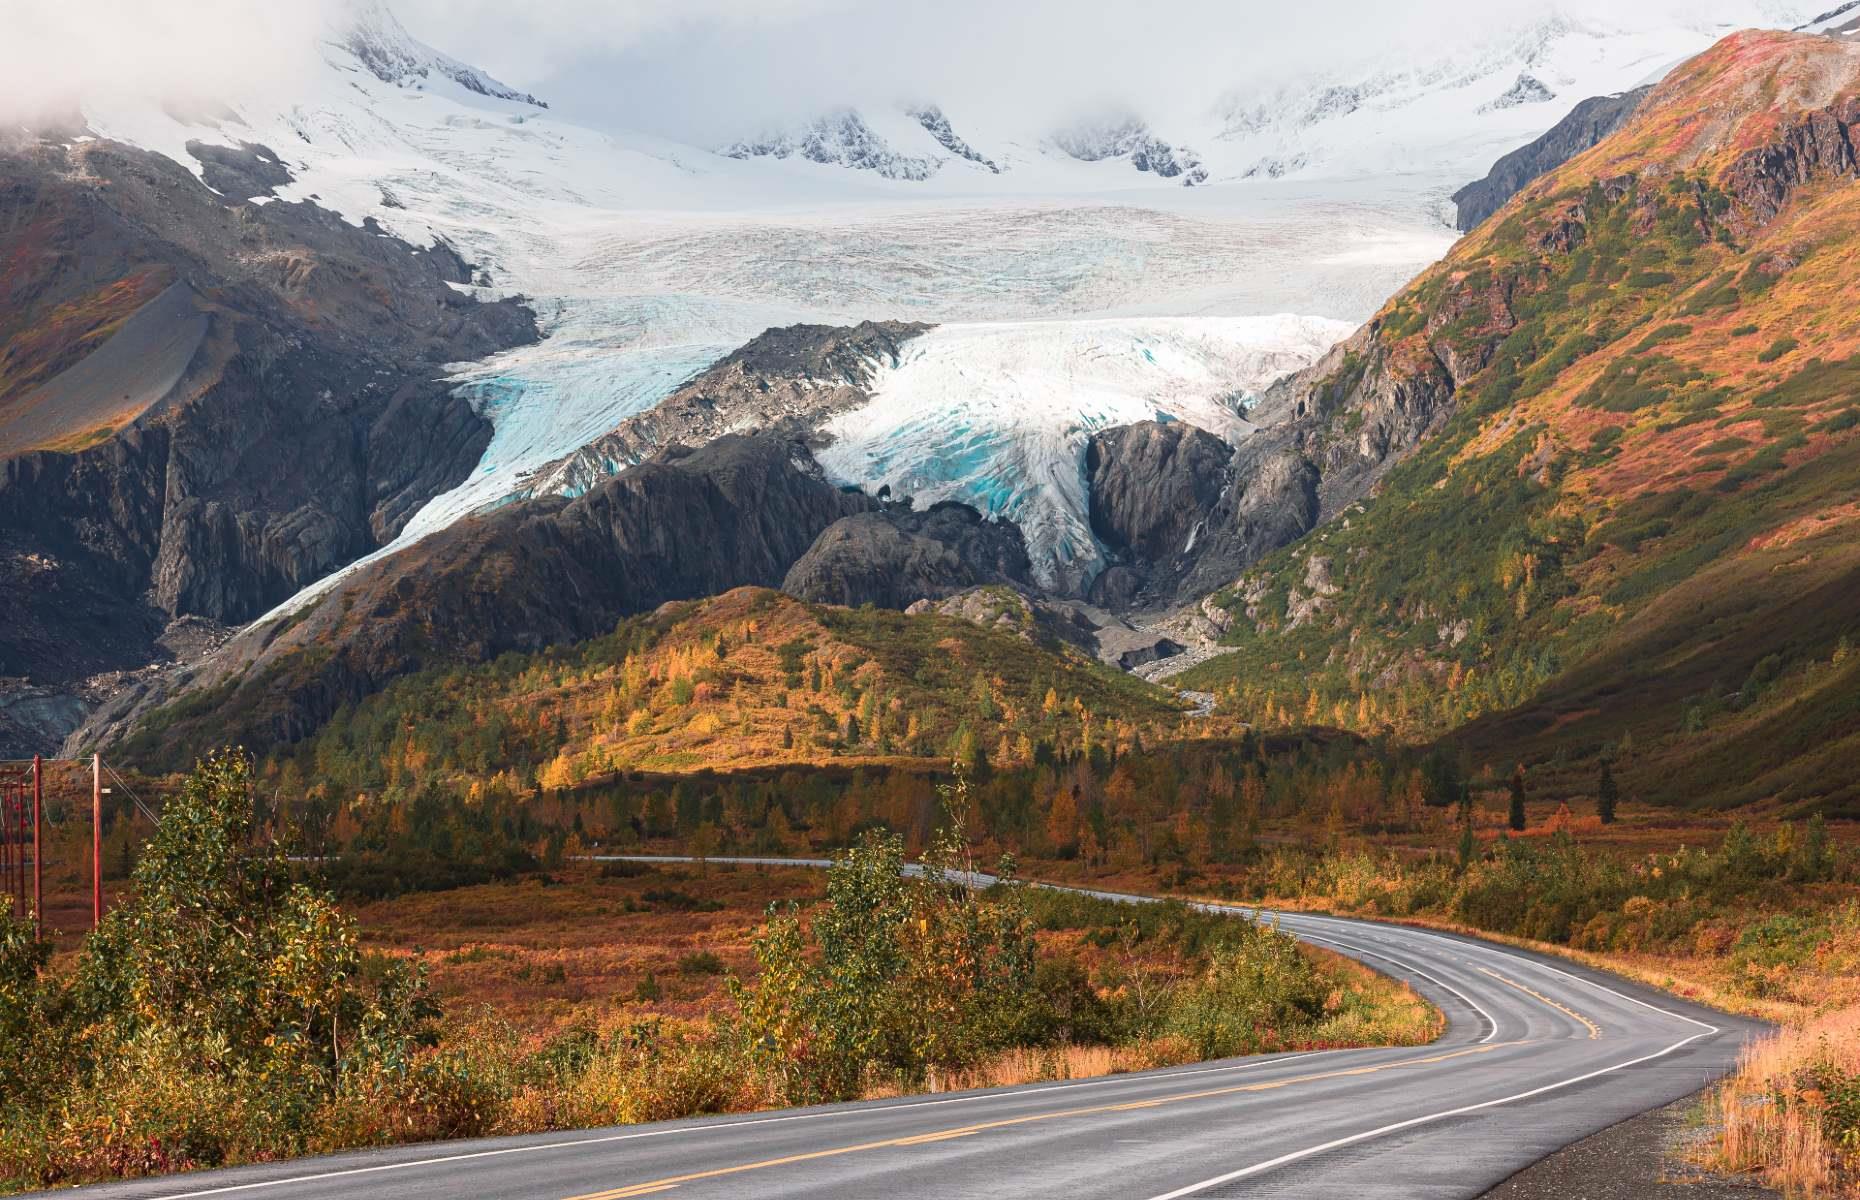 Next, you’ll reach Matanuska Glacier, where a stop to discover the stunning mass of ice is essential (but be sure to book a guided tour, as you cannot explore it alone). Stock up for gas at Glennallen, as it may be your last stop for a while. Then join the Glenn Highway, where more picture-perfect mountains, dramatic waterfalls and glaciers (such as Worthington, pictured) are in store before you reach your final destination of Valdez.